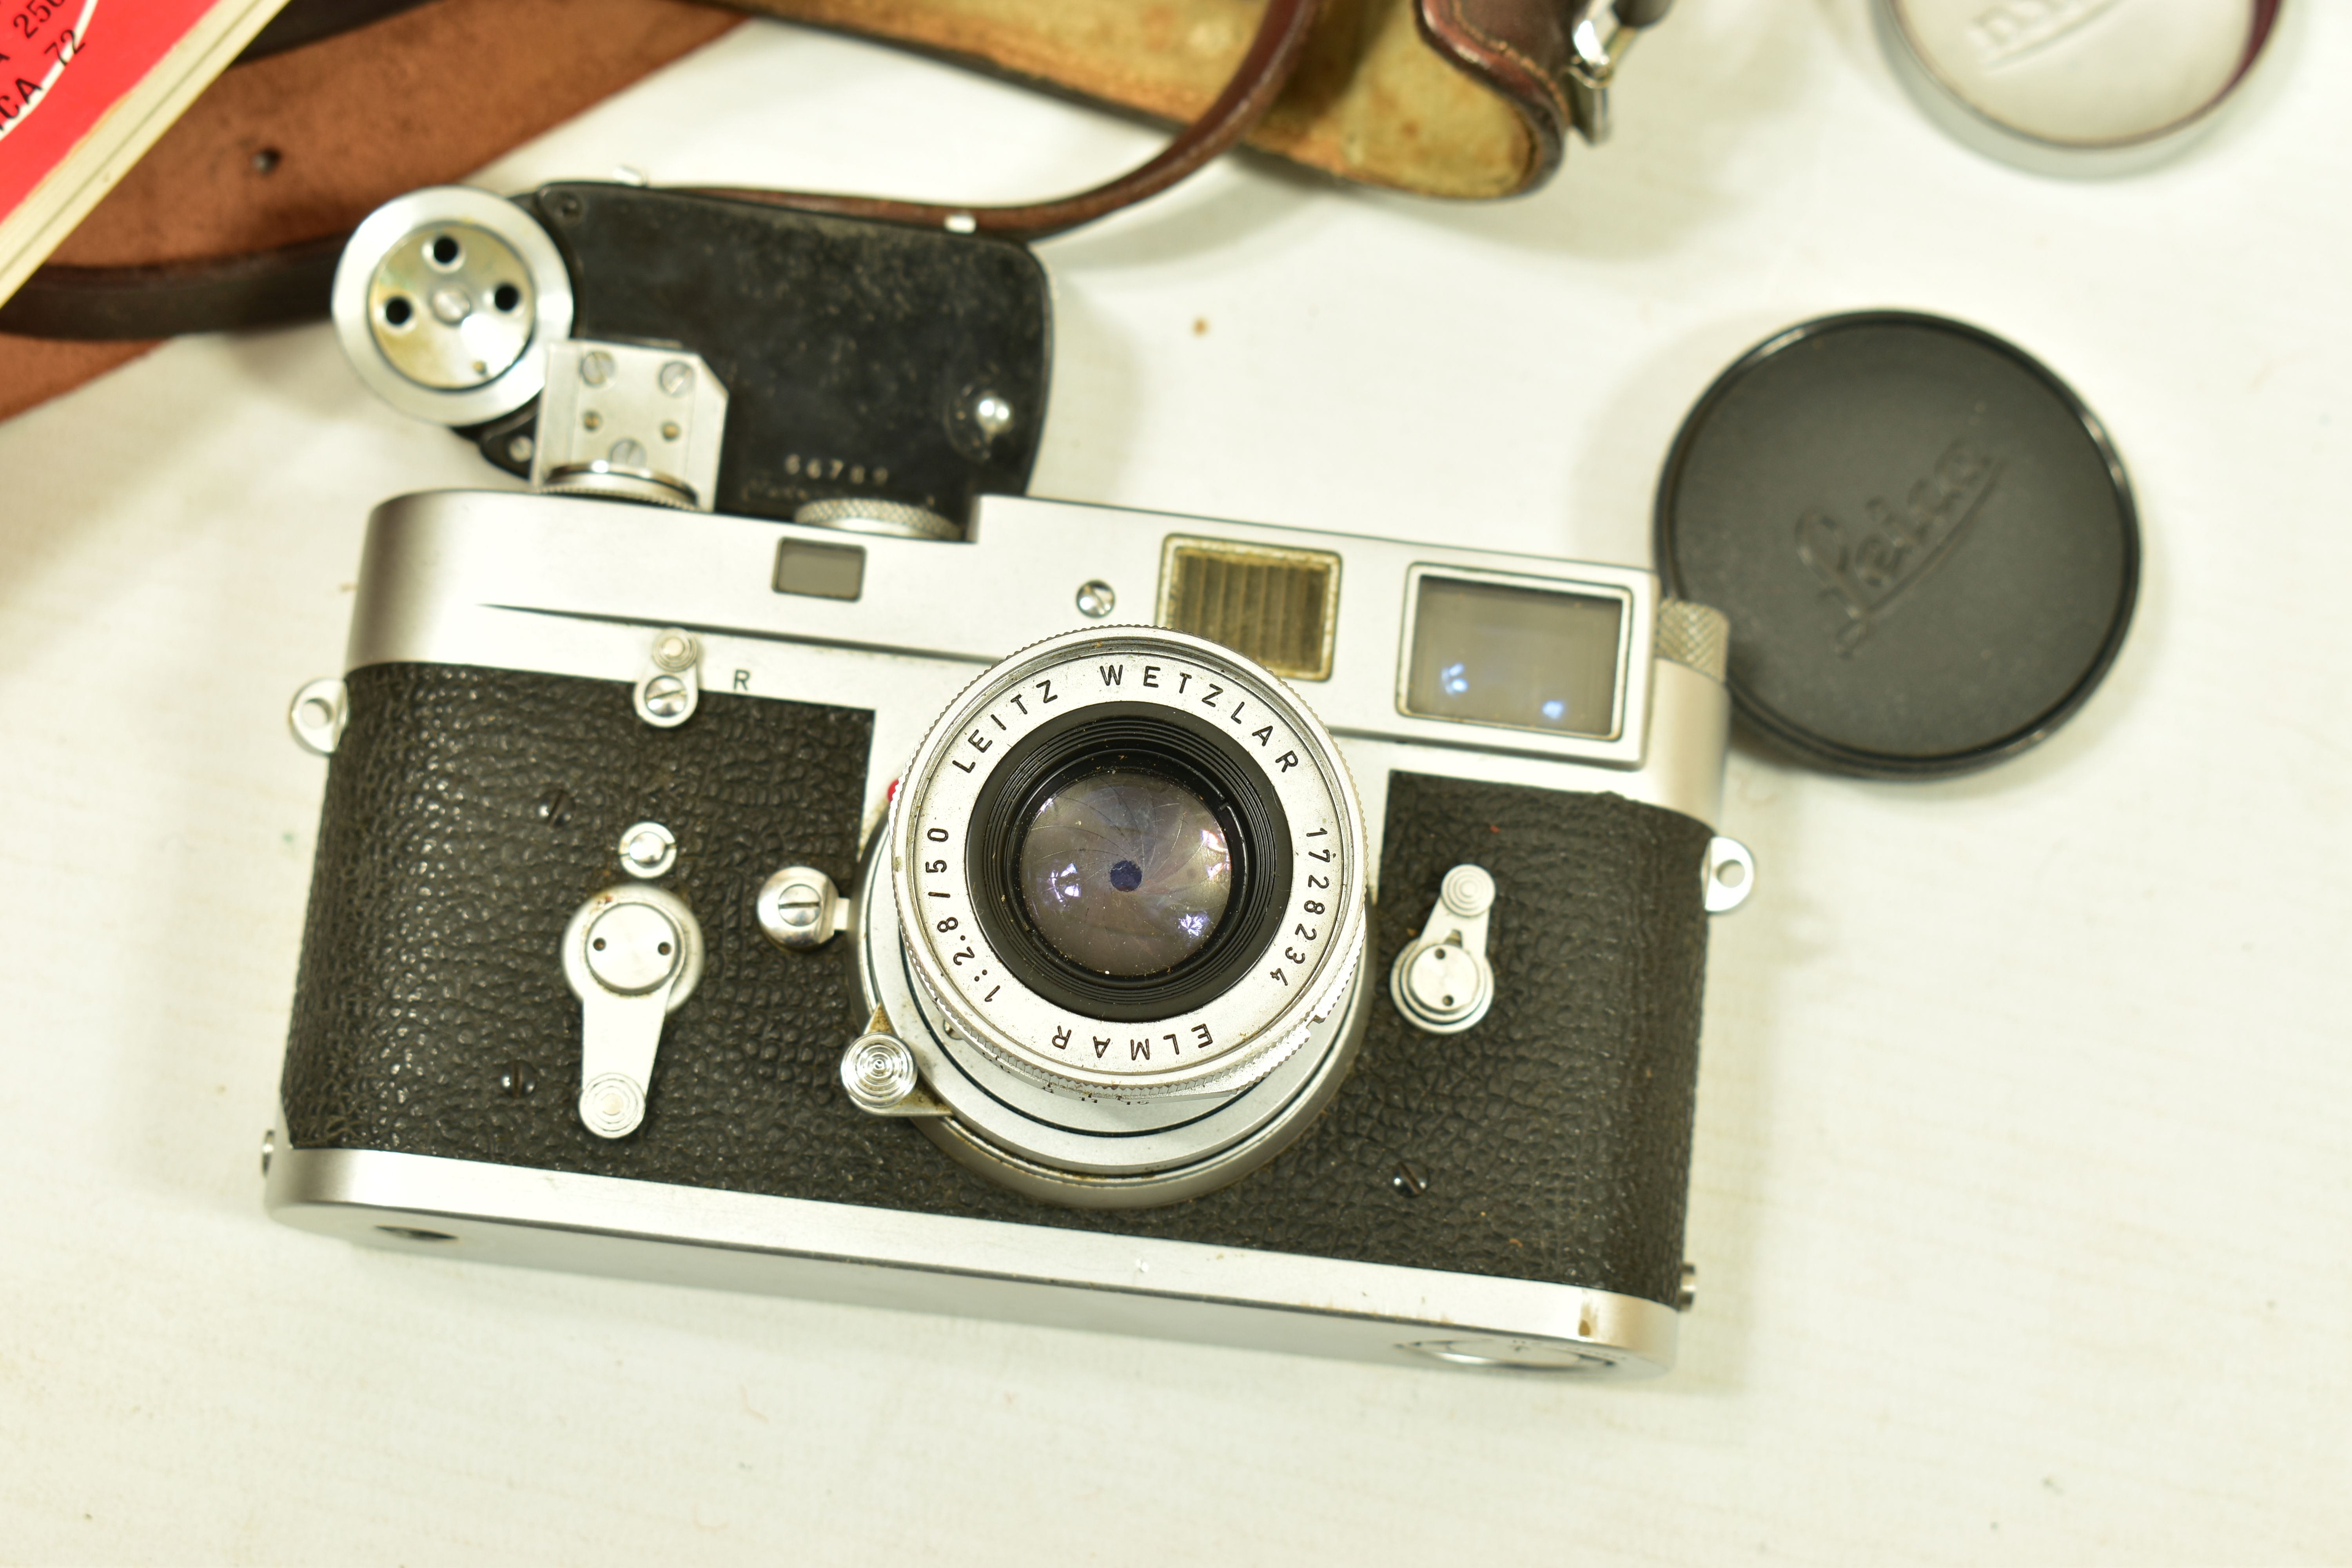 A LEICA M2 FILM CAMERA Serial No 1004152 fitted with an Elmar 50mm f2.8 lens Serial no 1728234 ( - Image 2 of 6